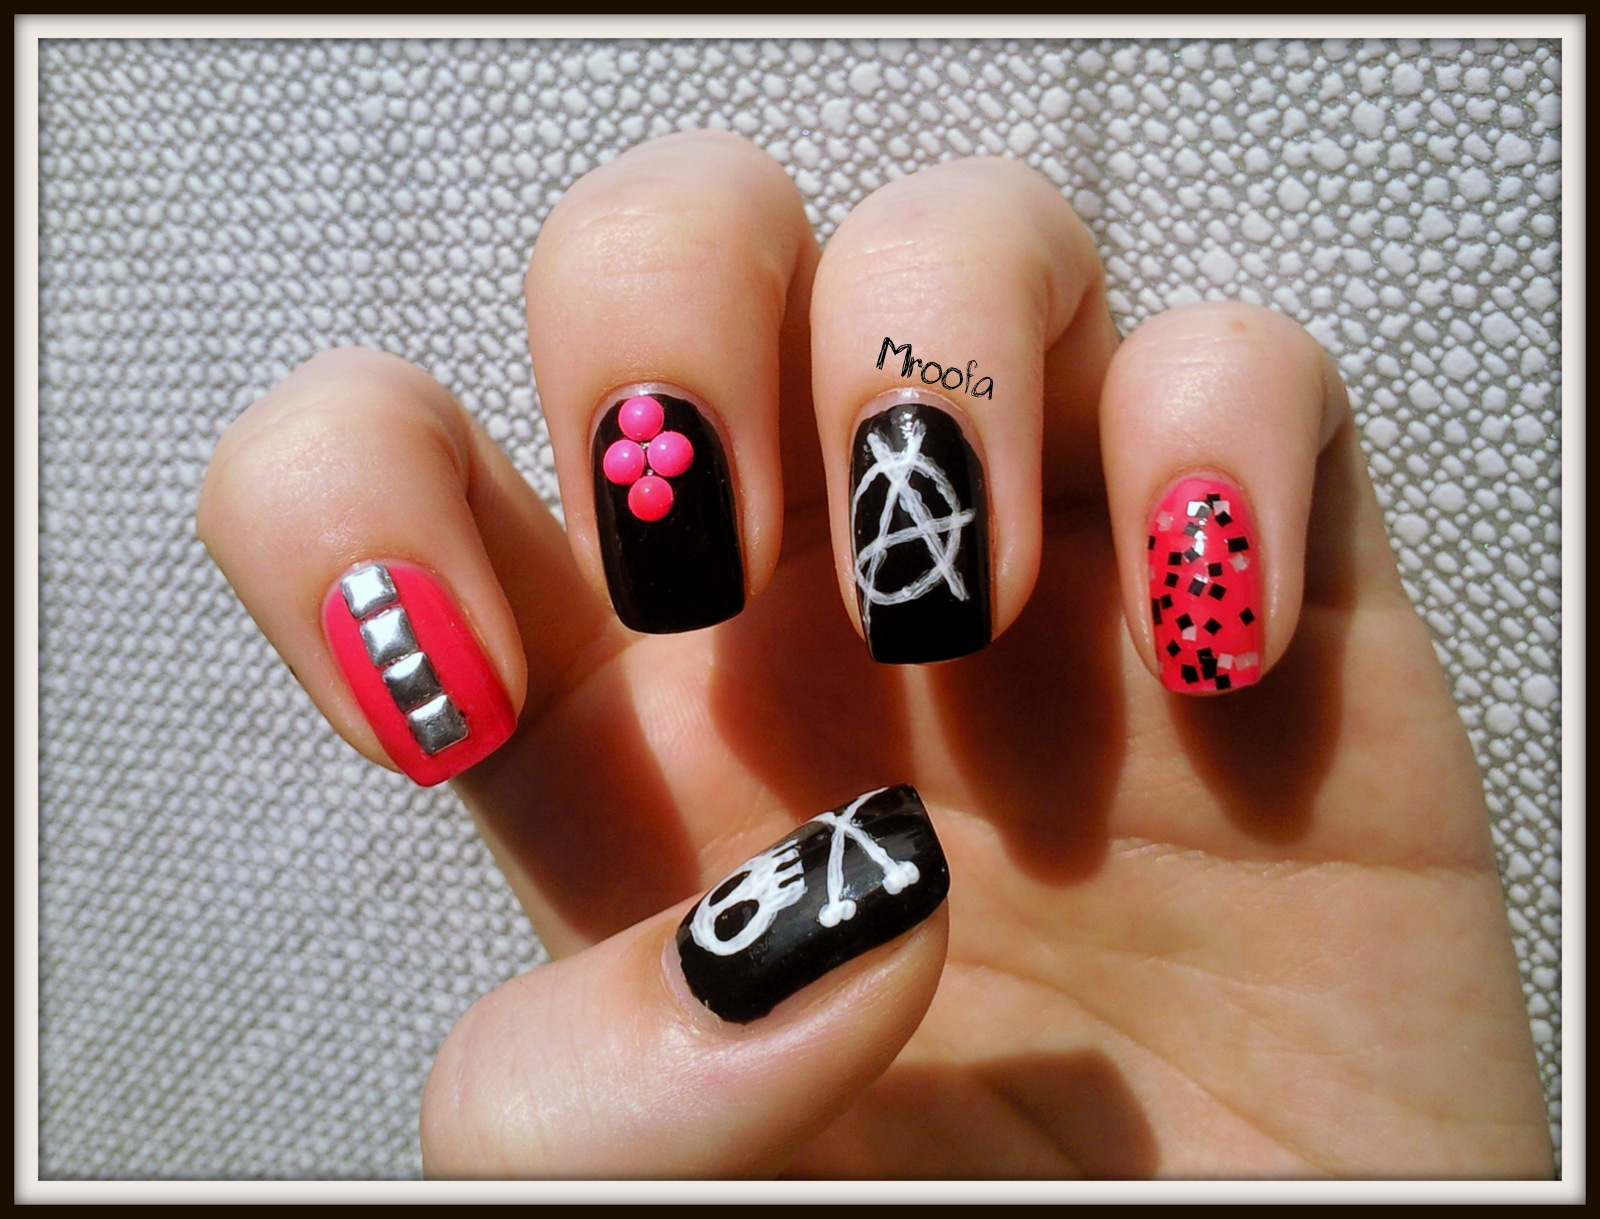 1. "Studded Punk Rock Nails" - wide 3